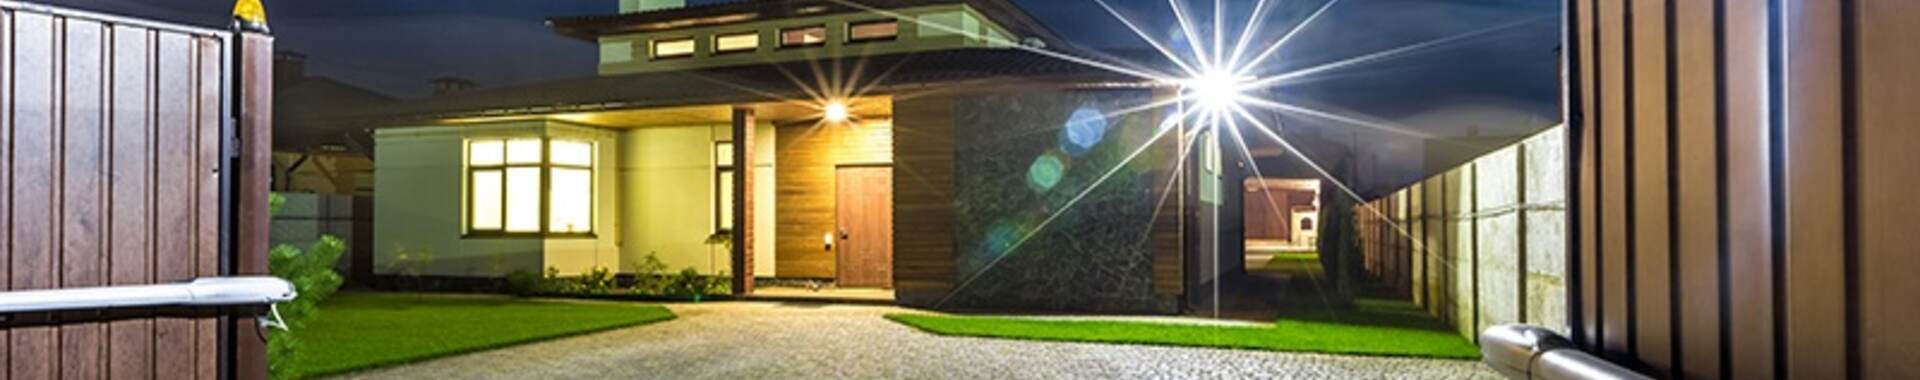 Luxury house with spotlight and electric gate security